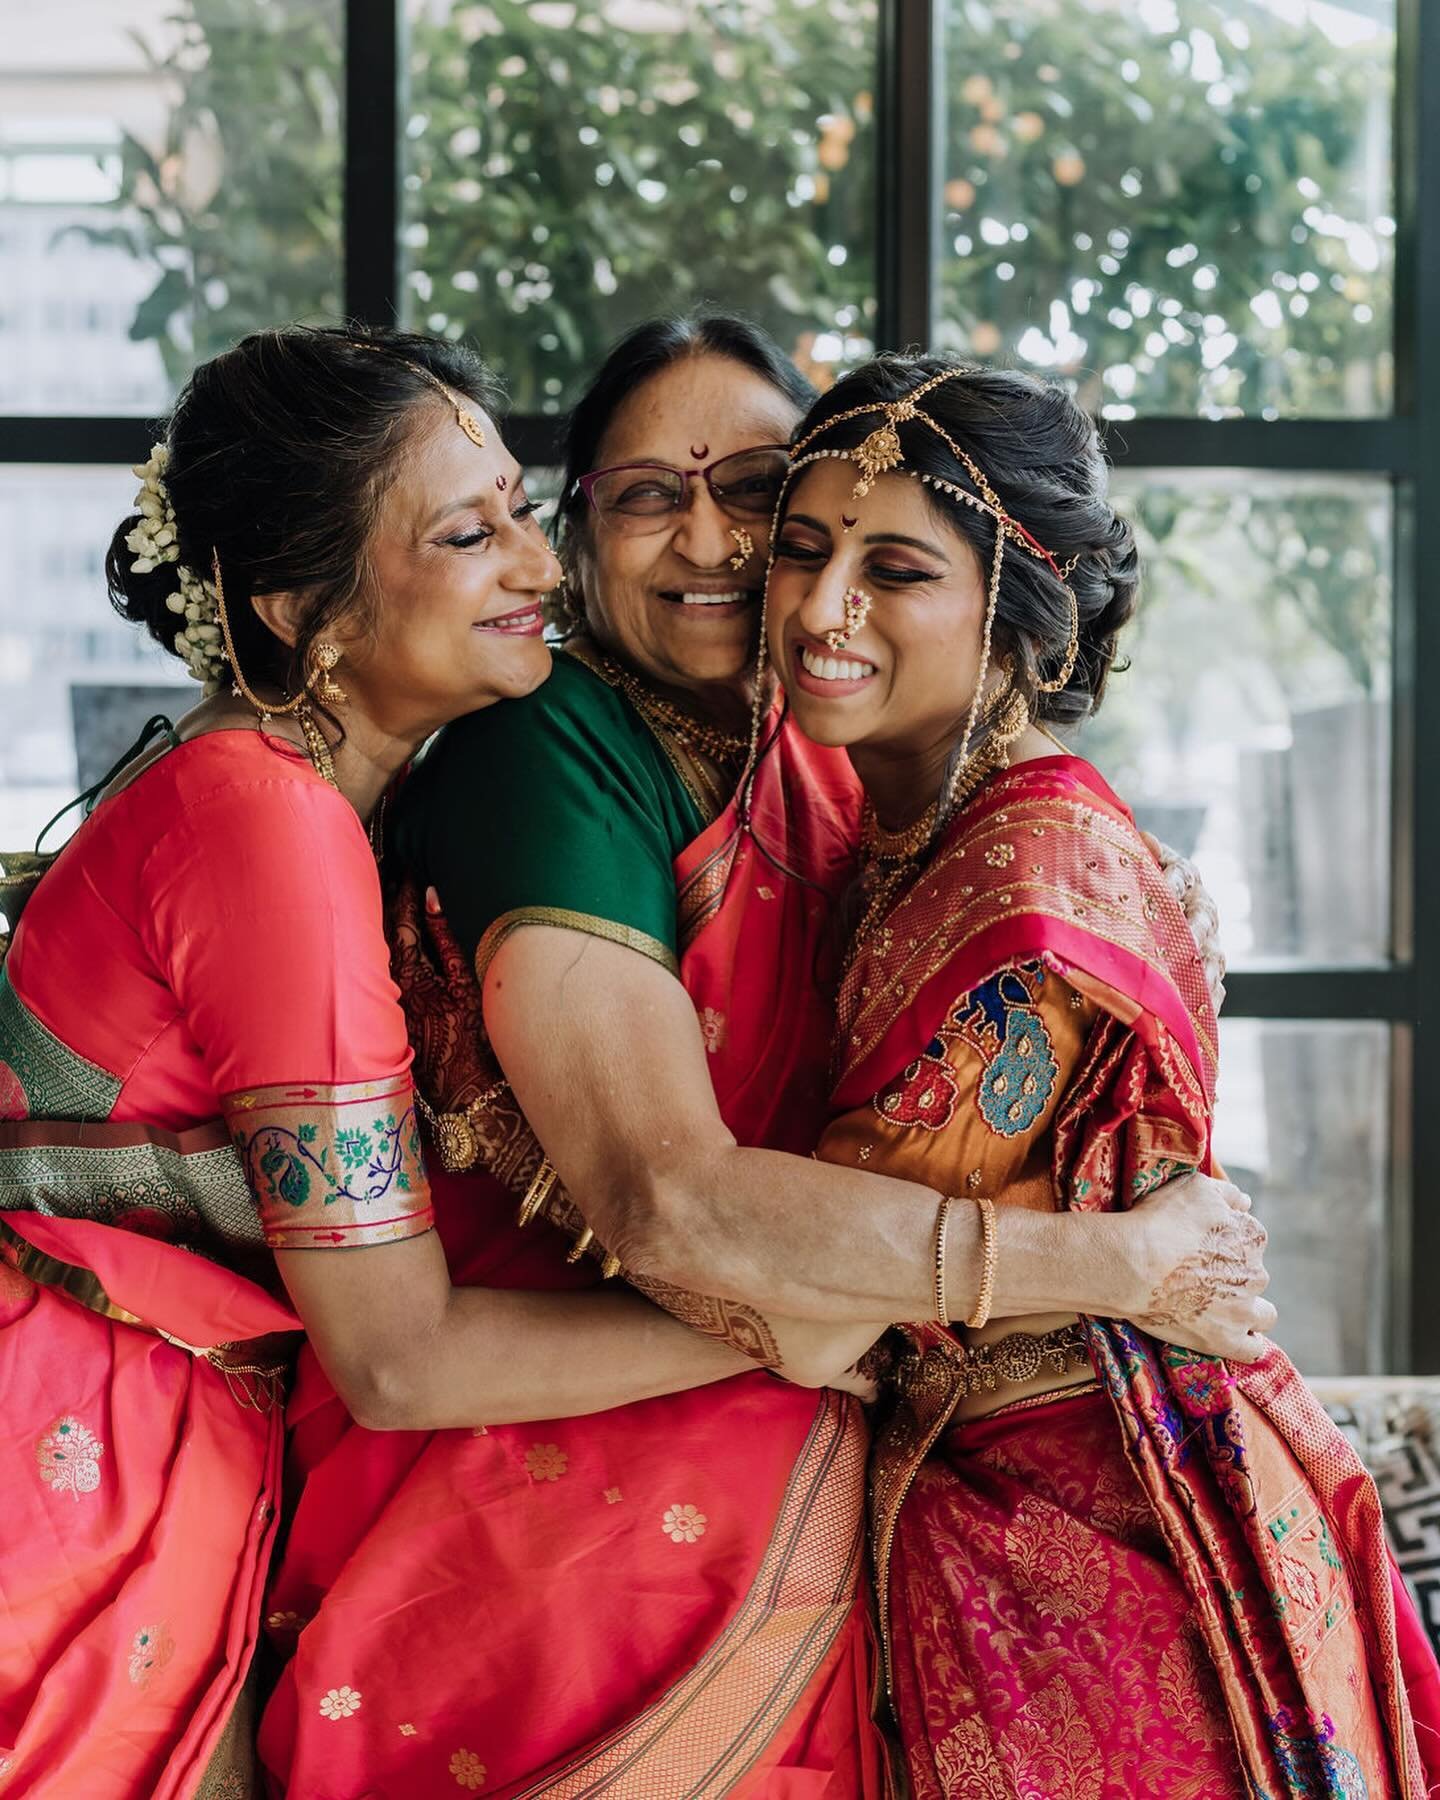 Happy Mother&rsquo;s Day! 💐

&hellip;
&hellip;
&hellip;
&hellip;
&hellip;
#dmvweddingplanner #dcweddingplanner #dcweddings #southasianweddingplanner #multiculturalweddingplanner #washingtonianweddings #indianbohodecor afinefetevents #southasianweddi